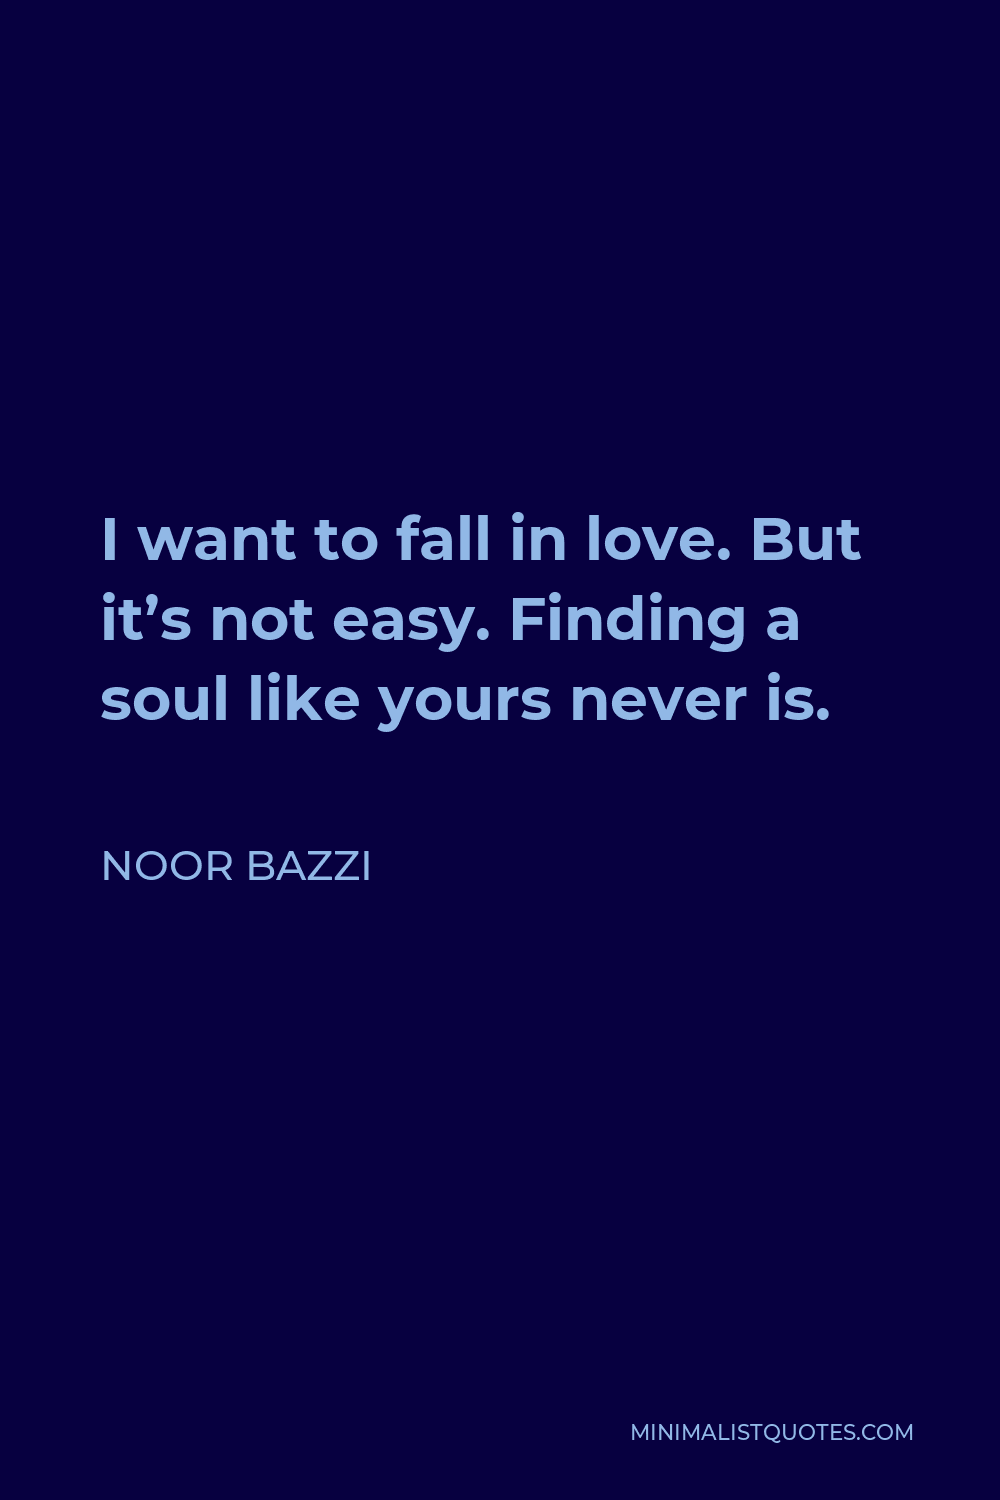 Noor Bazzi Quote - I want to fall in love. But it’s not easy. Finding a soul like yours never is.